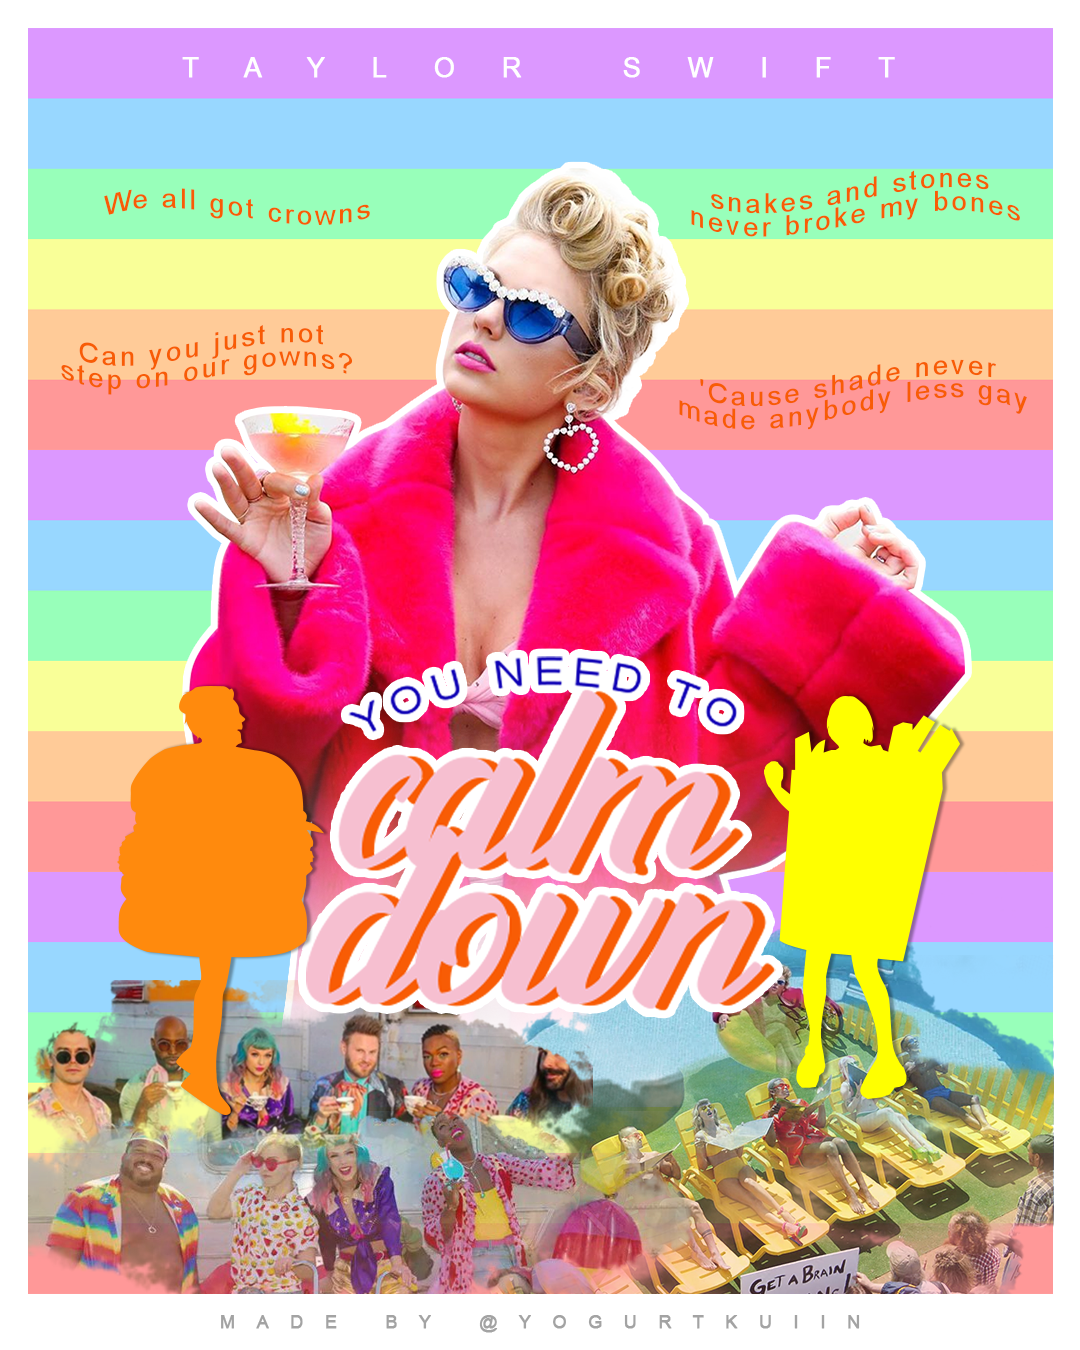 You Need To Calm Down | Poster